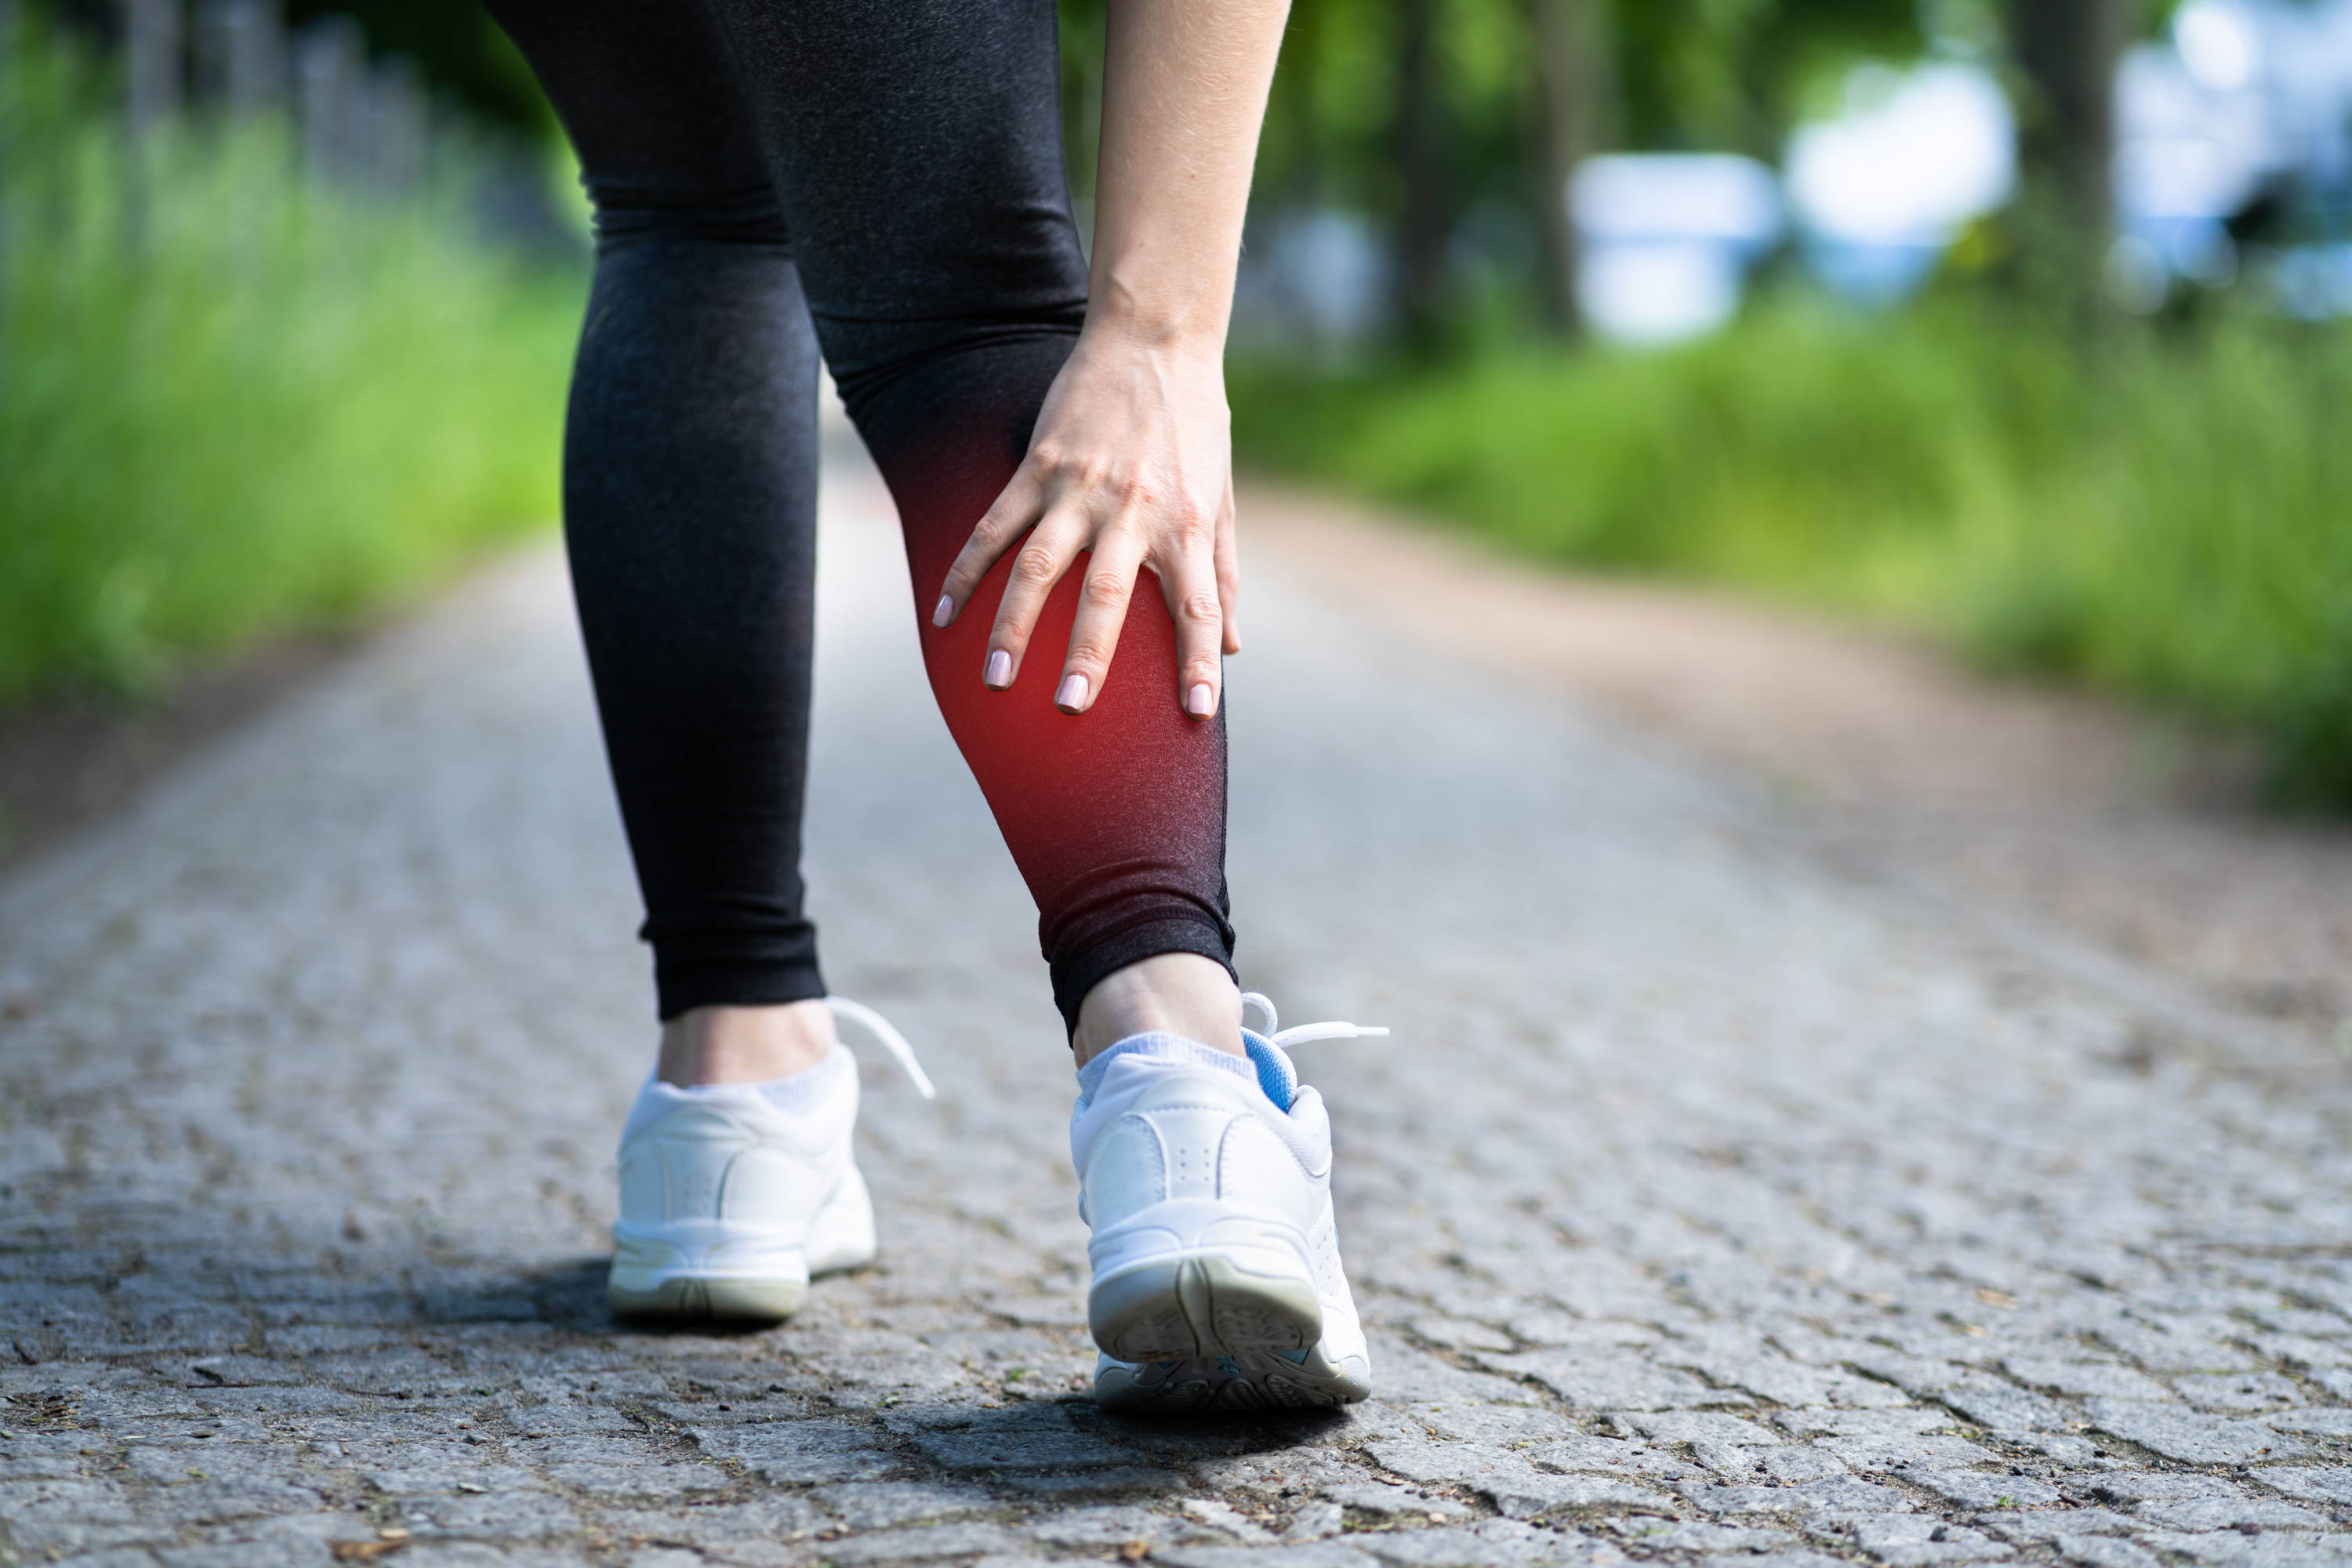 Woman grabbing leg in pain from swelling while walking outdoors